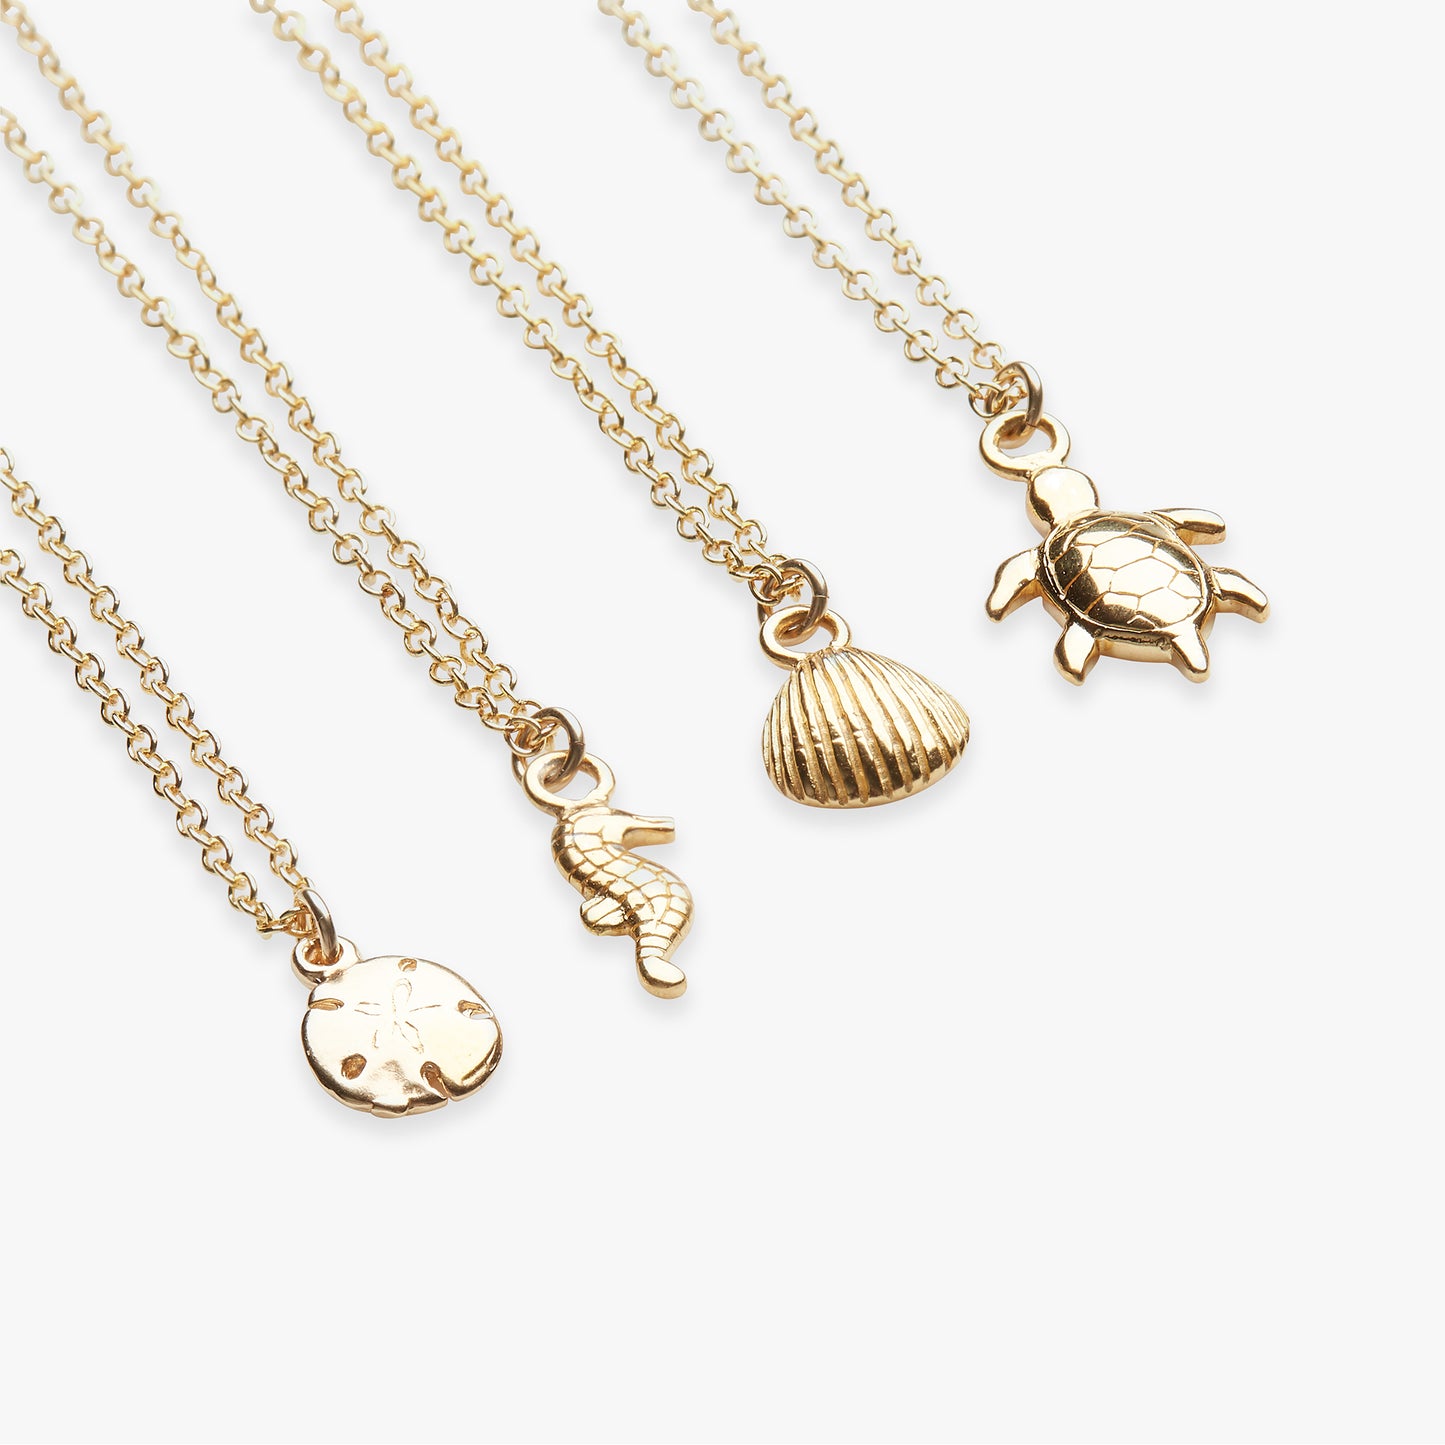 Deep Sea charm collection necklace gold filled